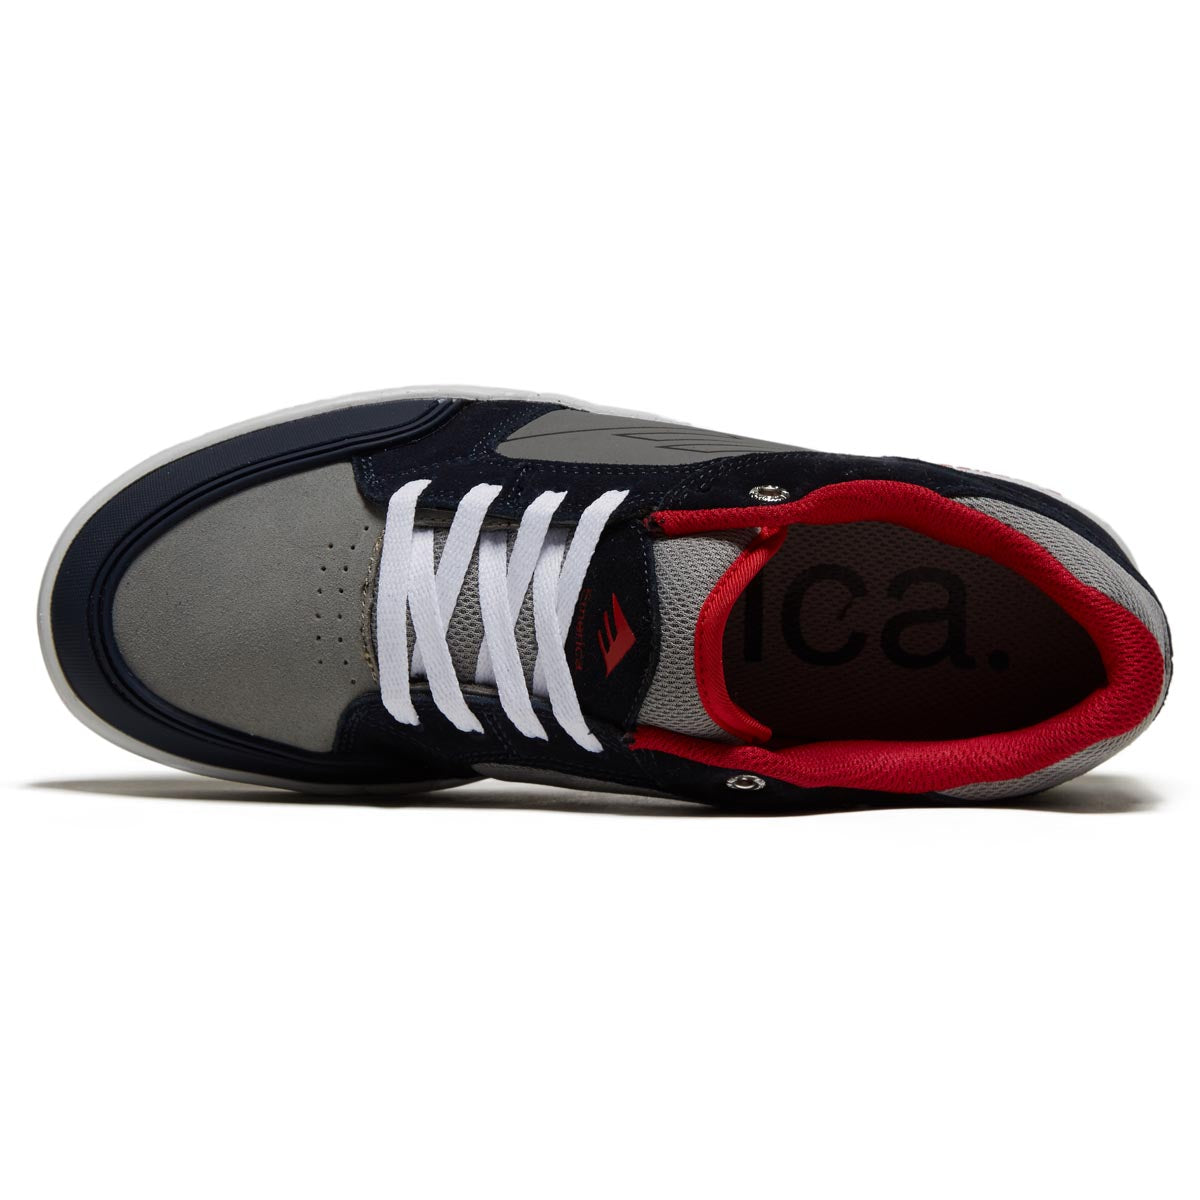 Emerica Heritic Shoes - Navy/Grey/Red image 3